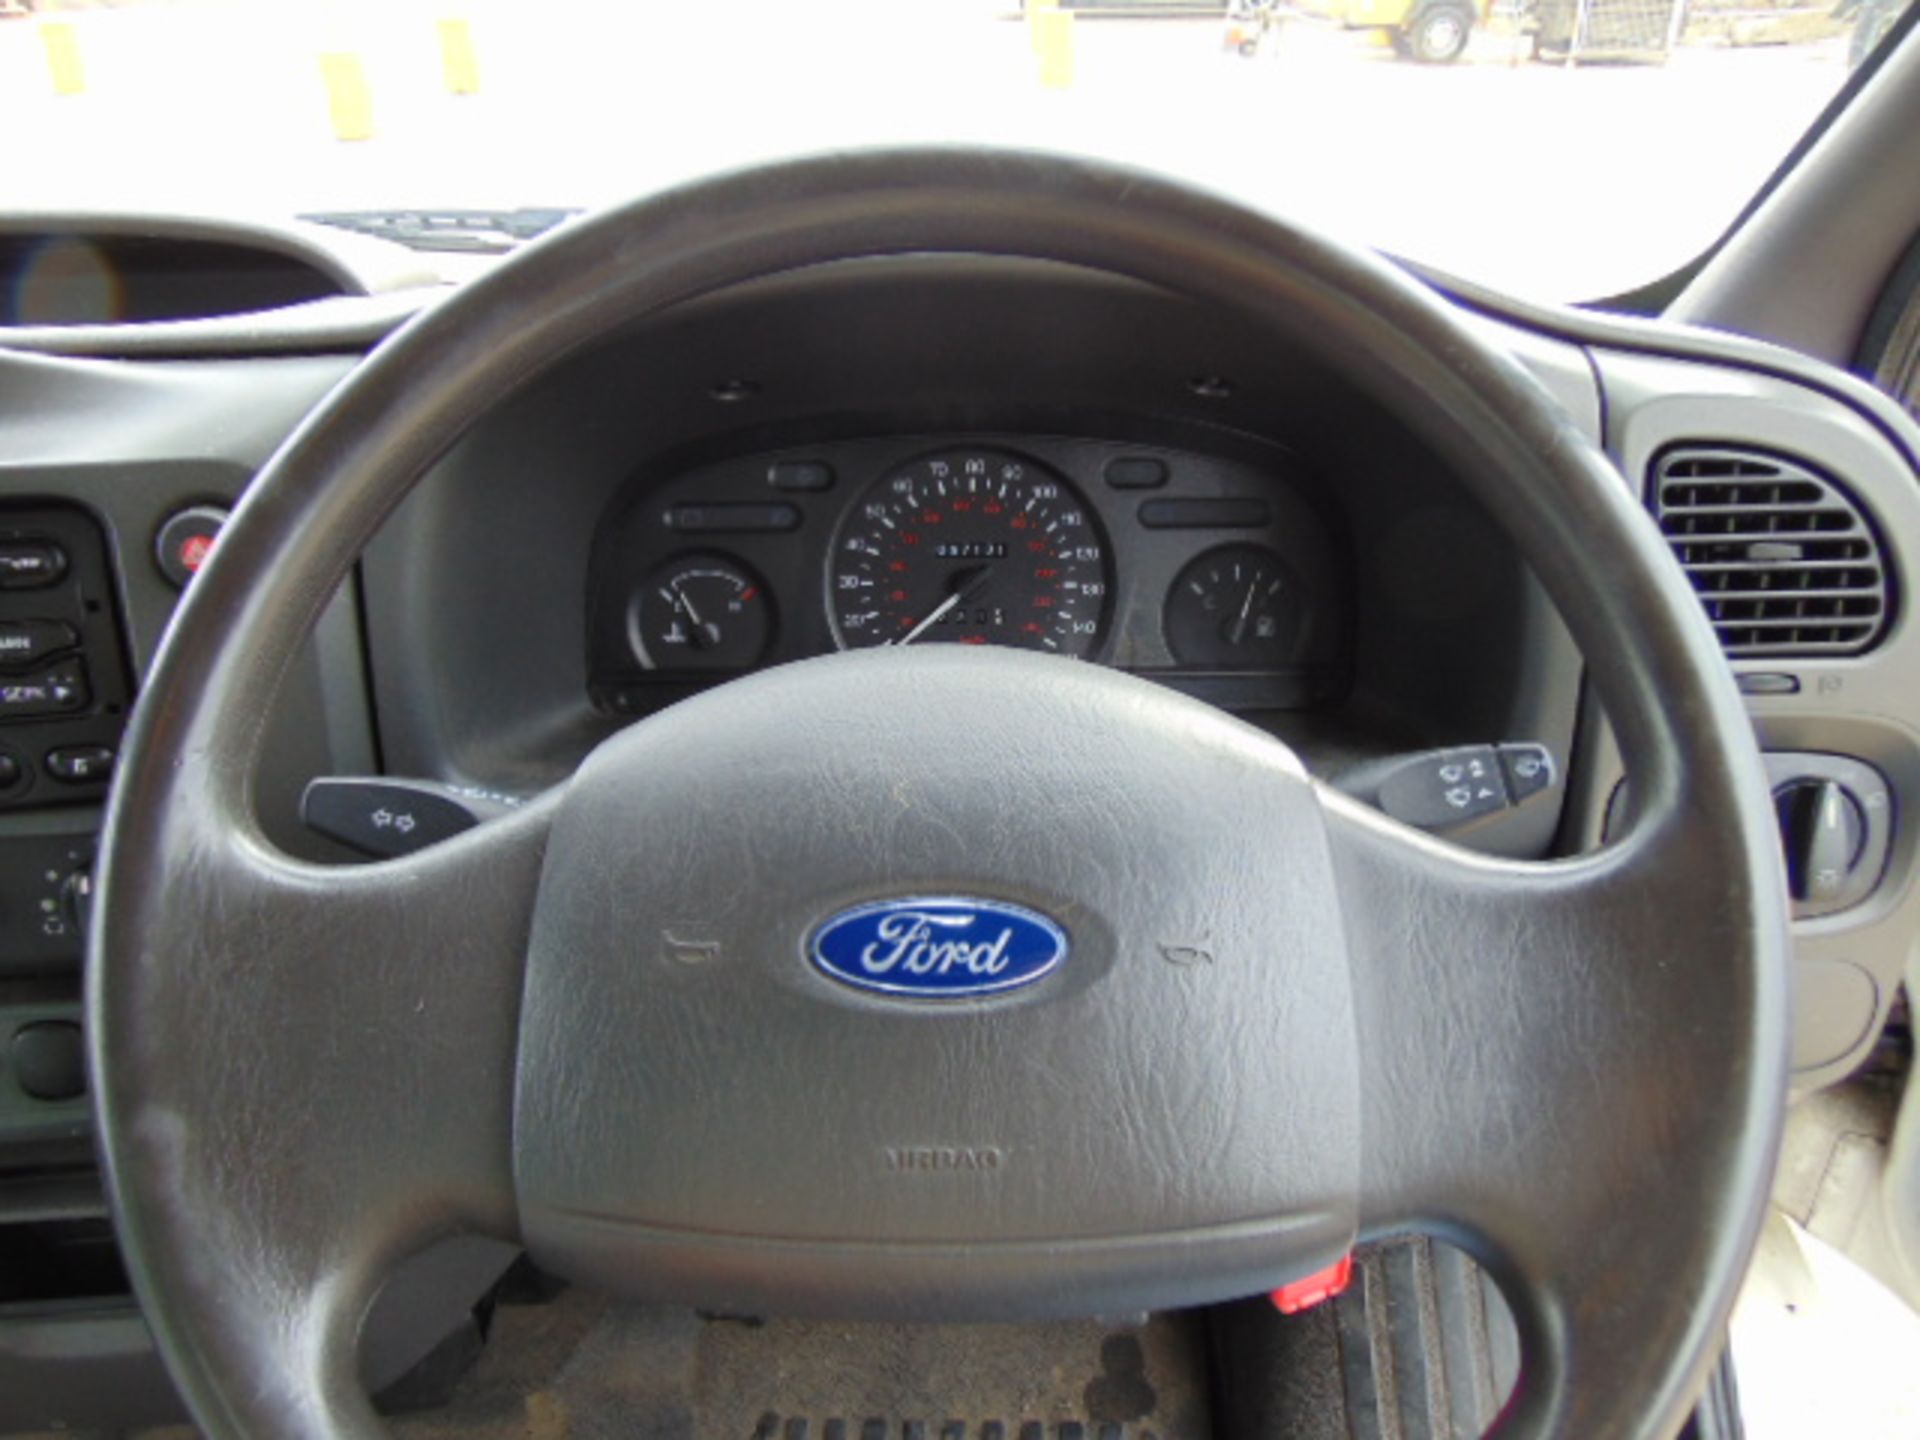 2005 Ford Transit 90 T350 Dropside Pickup 57,131 miles - Image 10 of 18